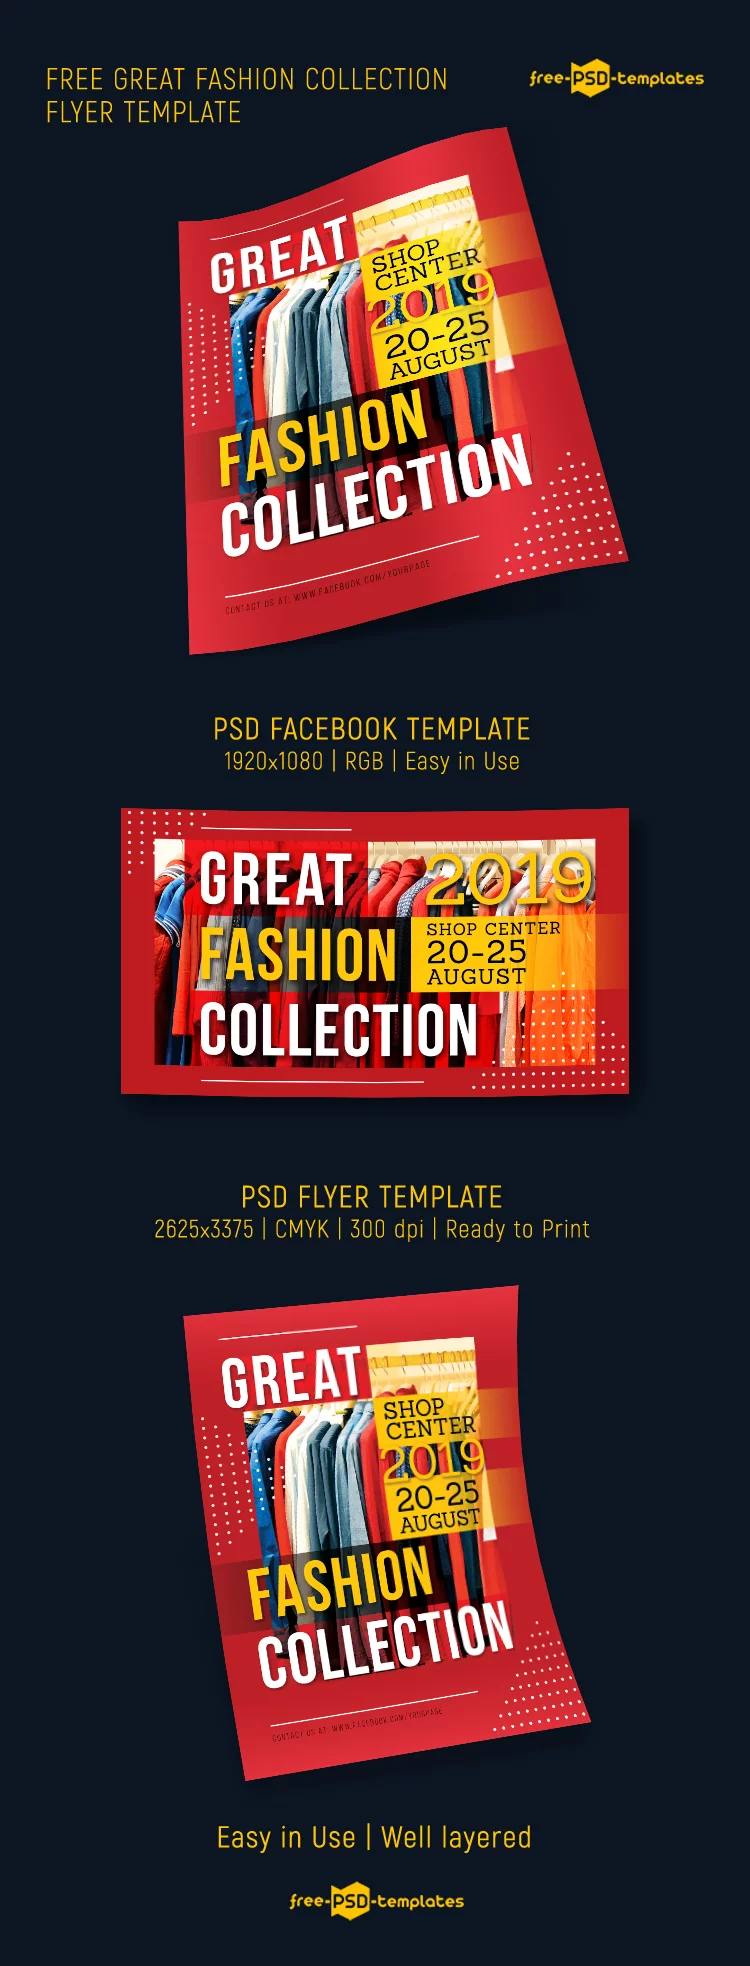 Free Great Fashion Collection Flyer Template